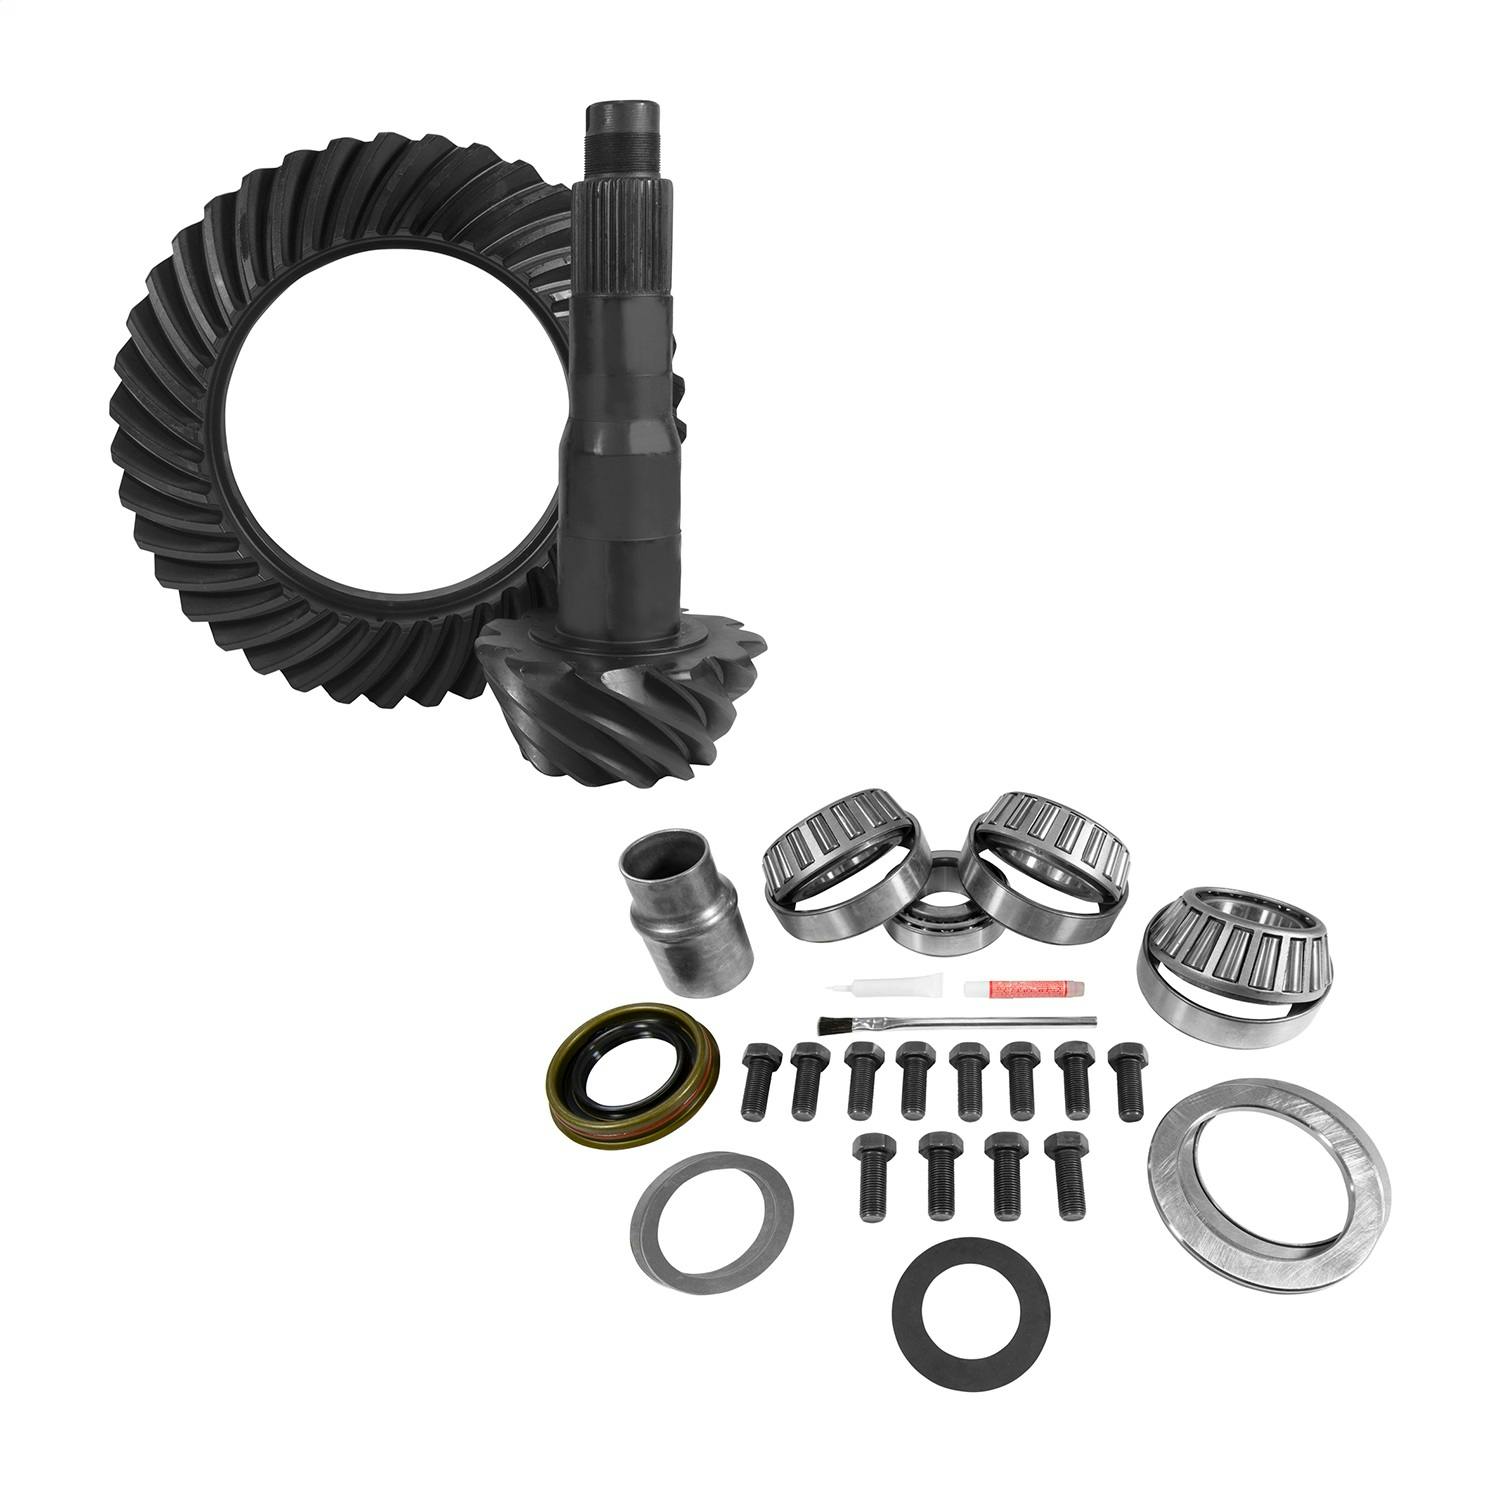 USA Standard Gear ZGK2151 10.5in. Ford 4.88 Rear Ring/Pinion and Install Kit